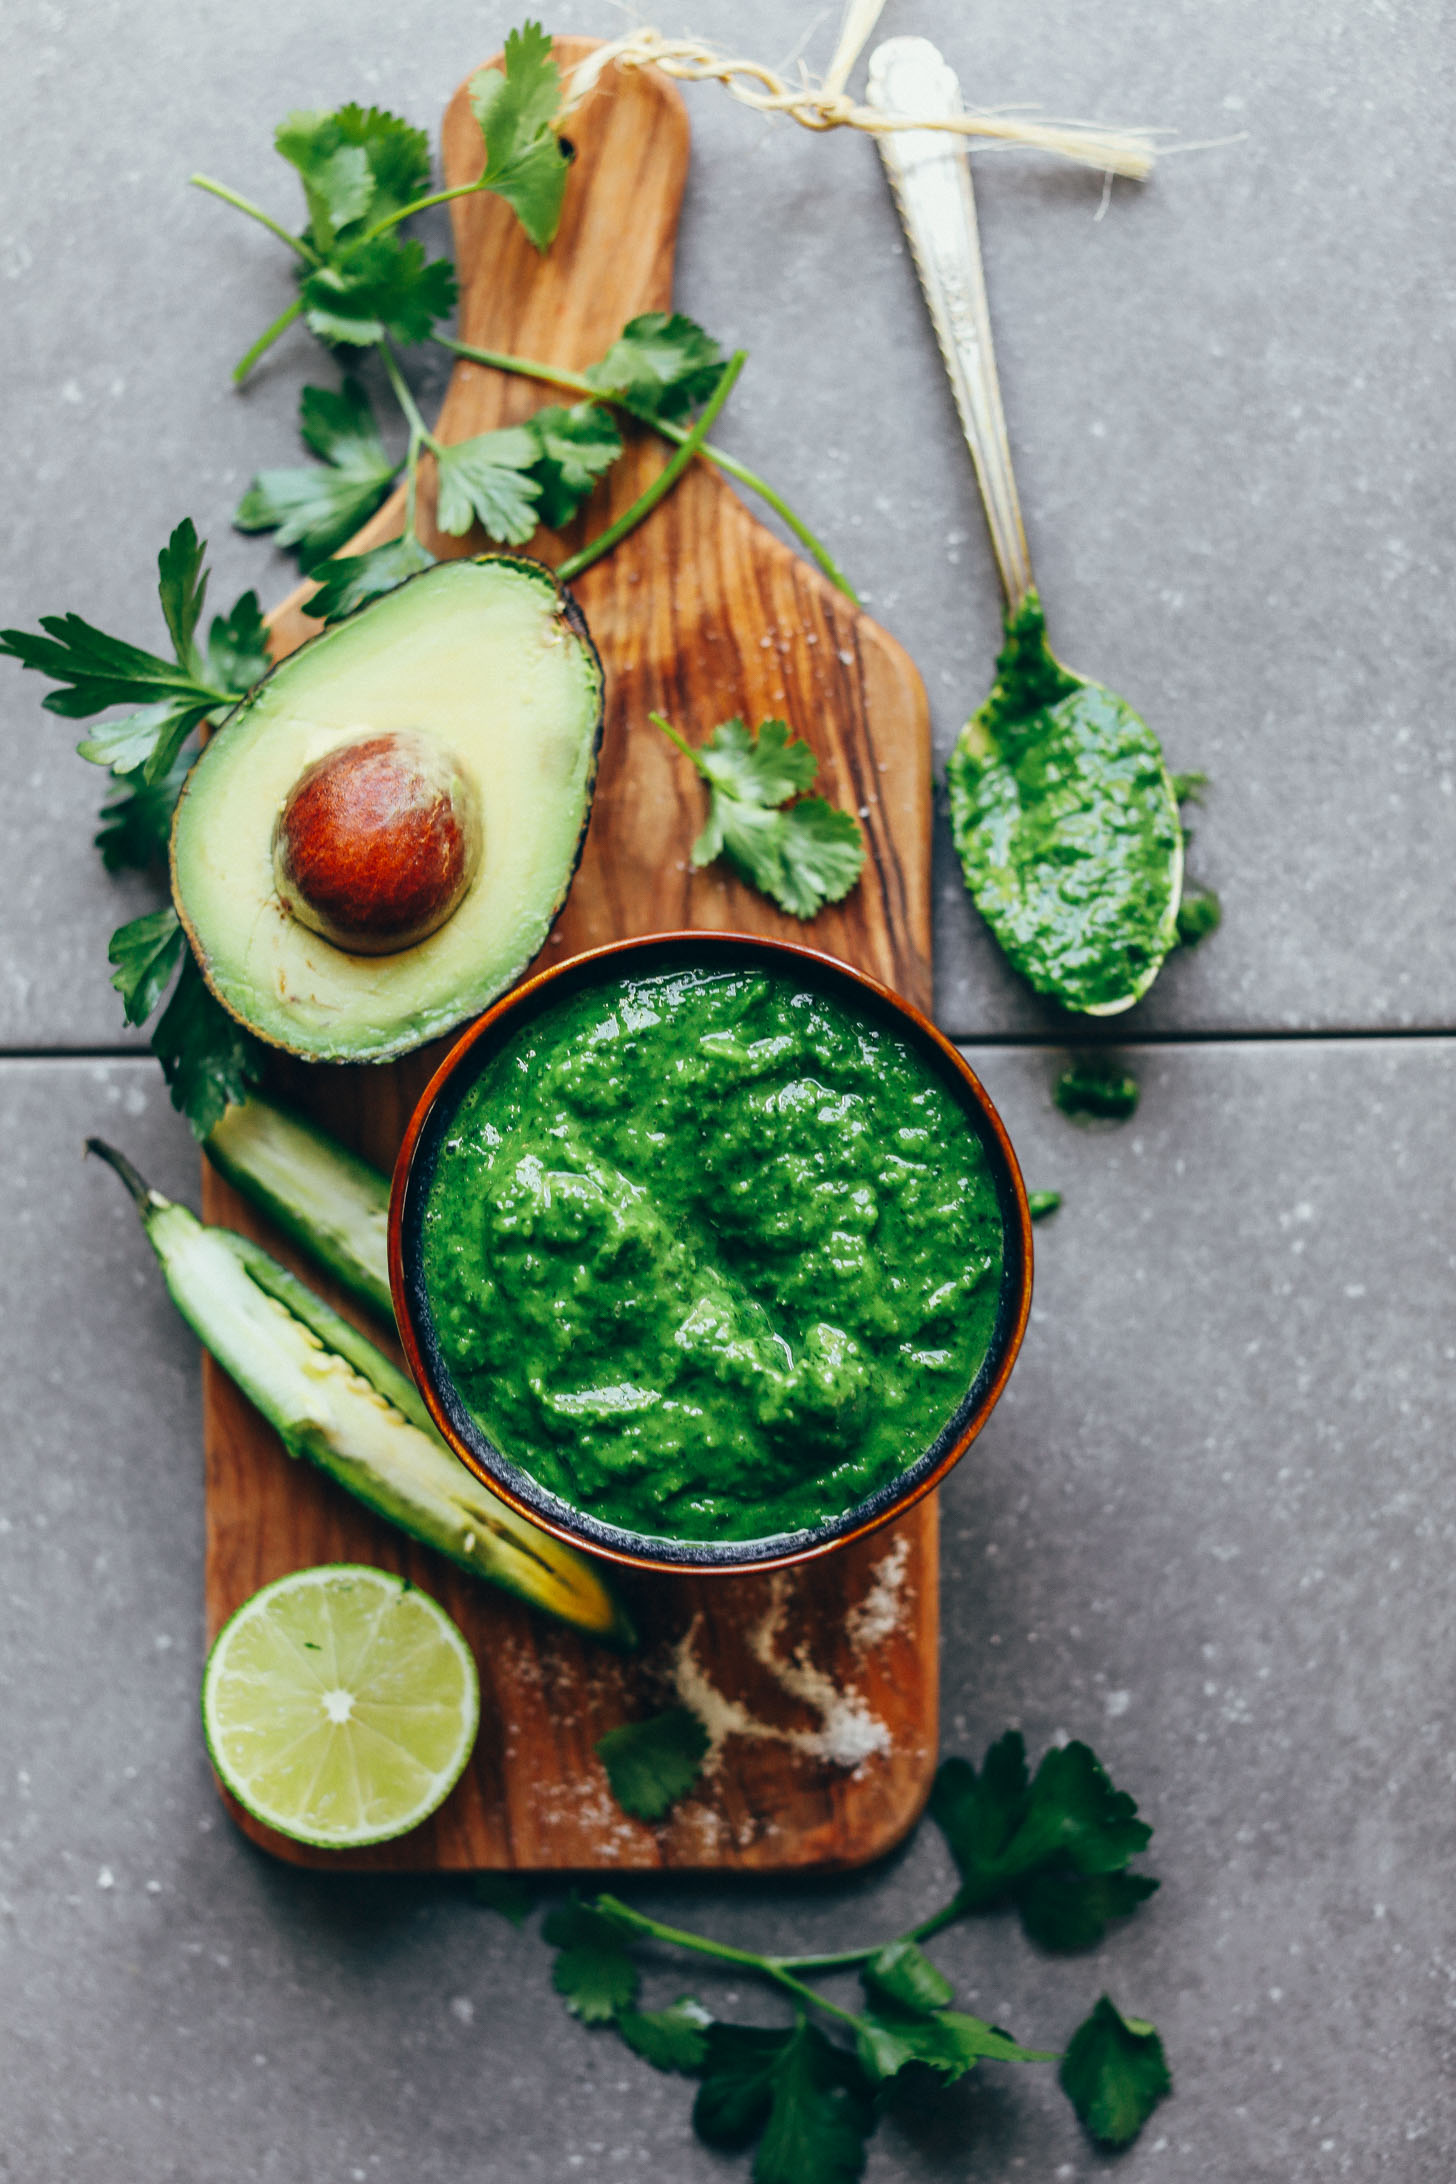 A bowl of our delicious Green Chimichurri recipe that makes the perfect dip or spread